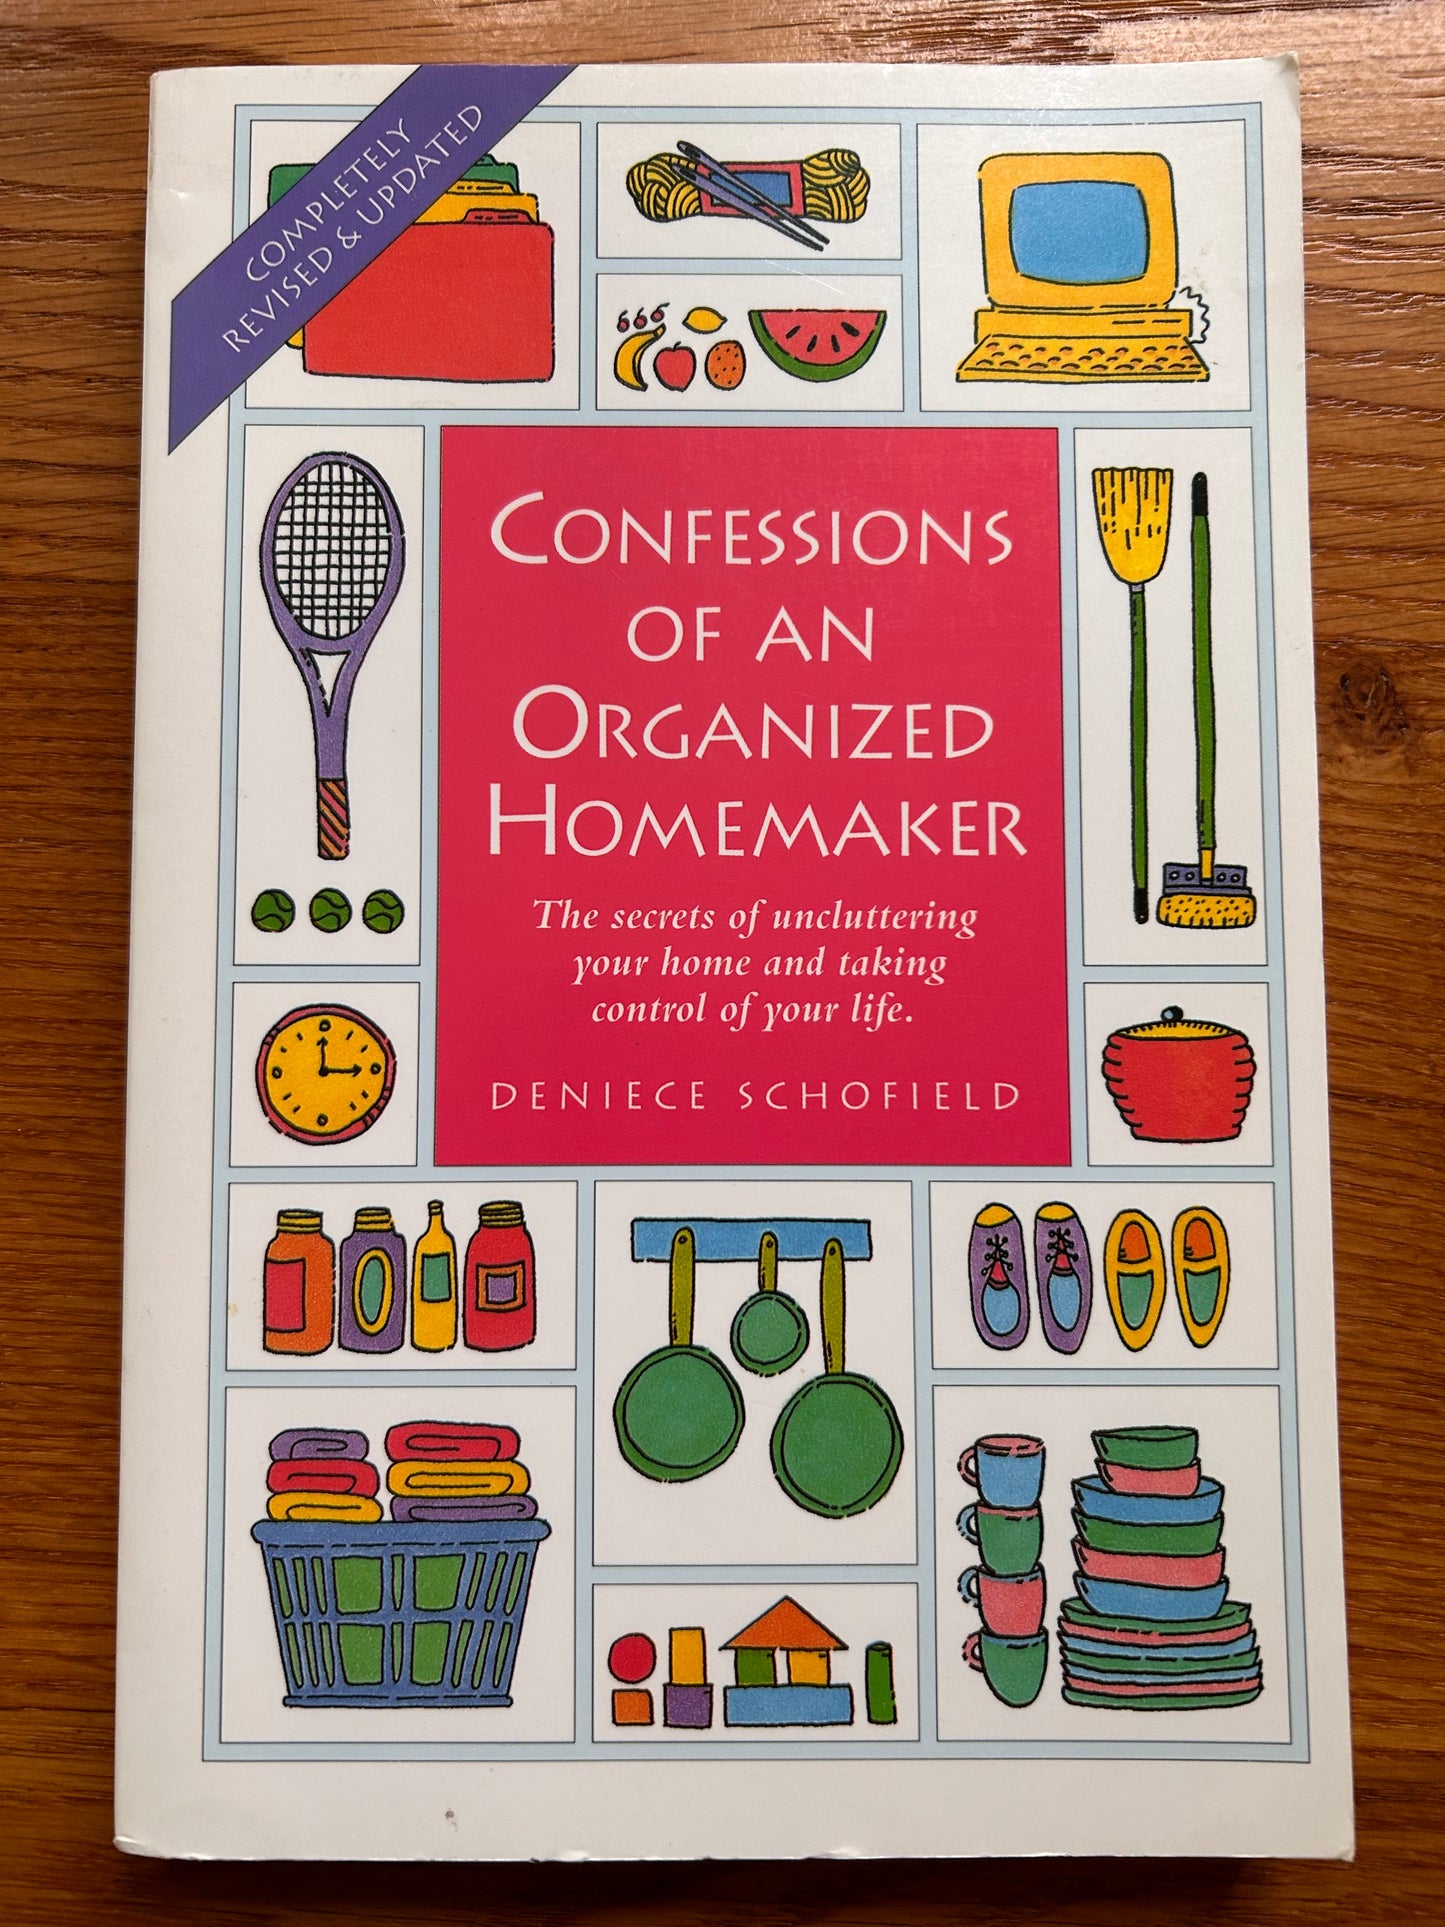 Confessions of an Organized Homemaker: The secrets of uncluttering your home and taking control of your life.